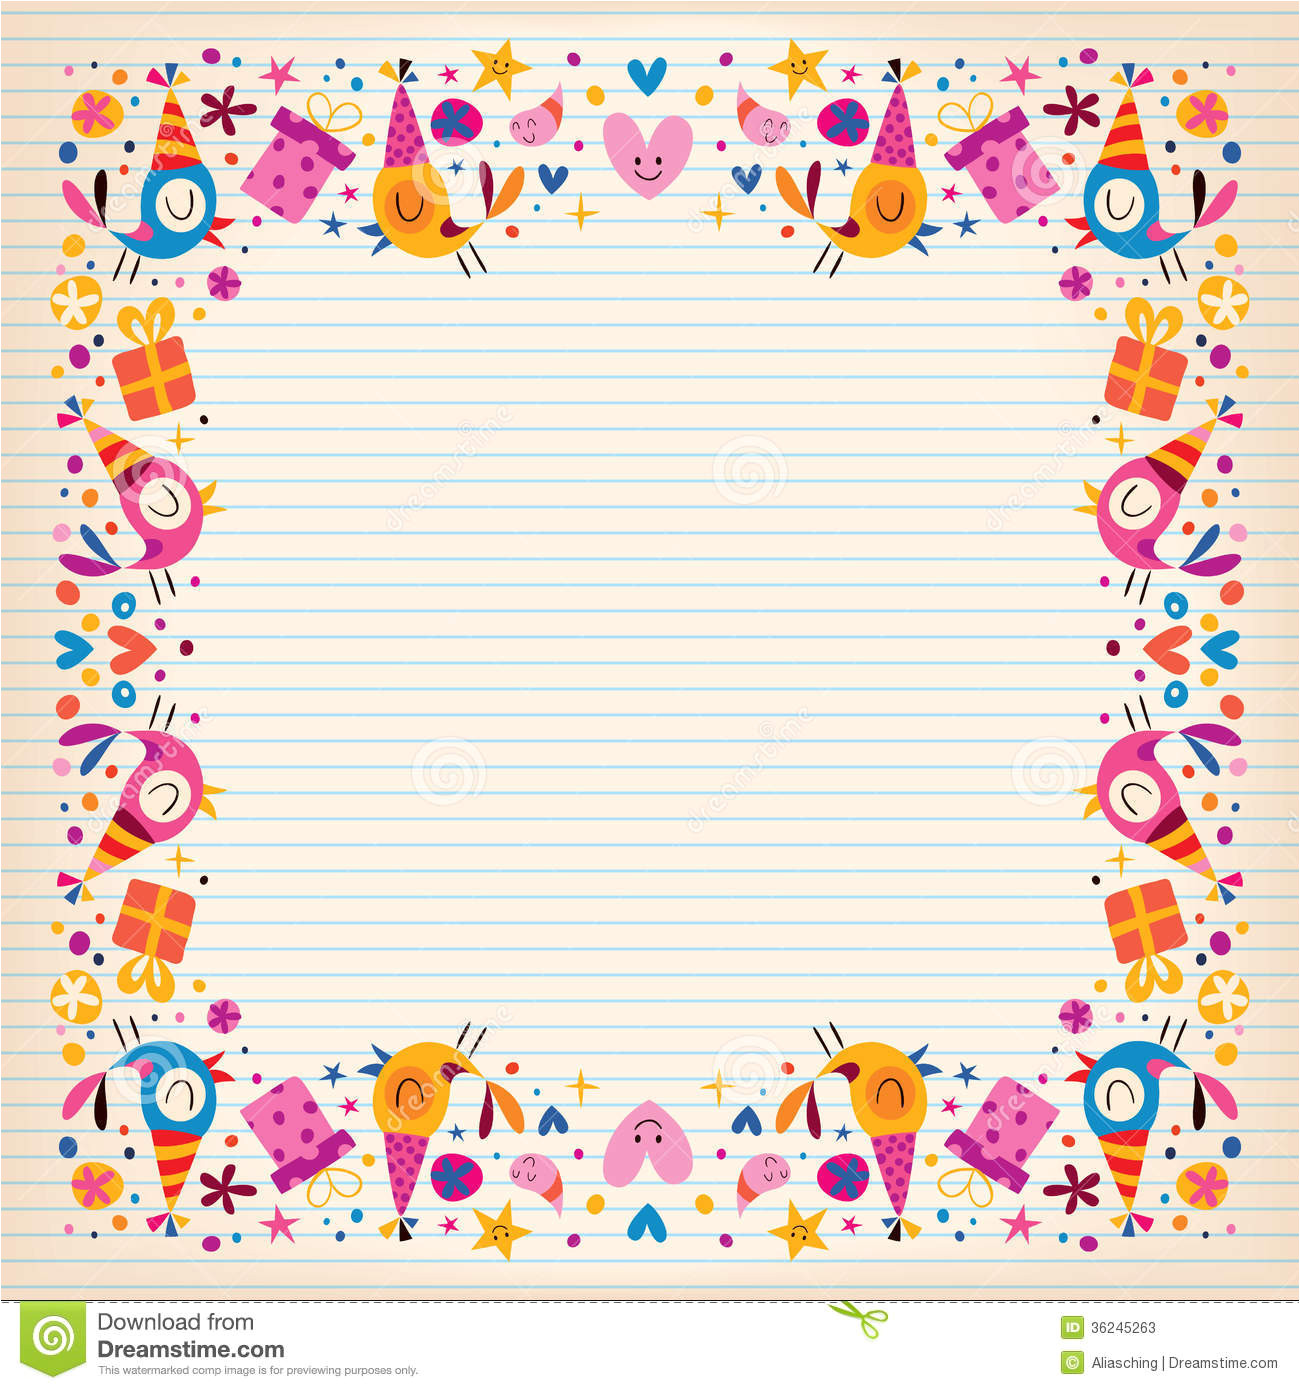 happy birthday border lined paper card space text decorative frame design 36245263 jpg